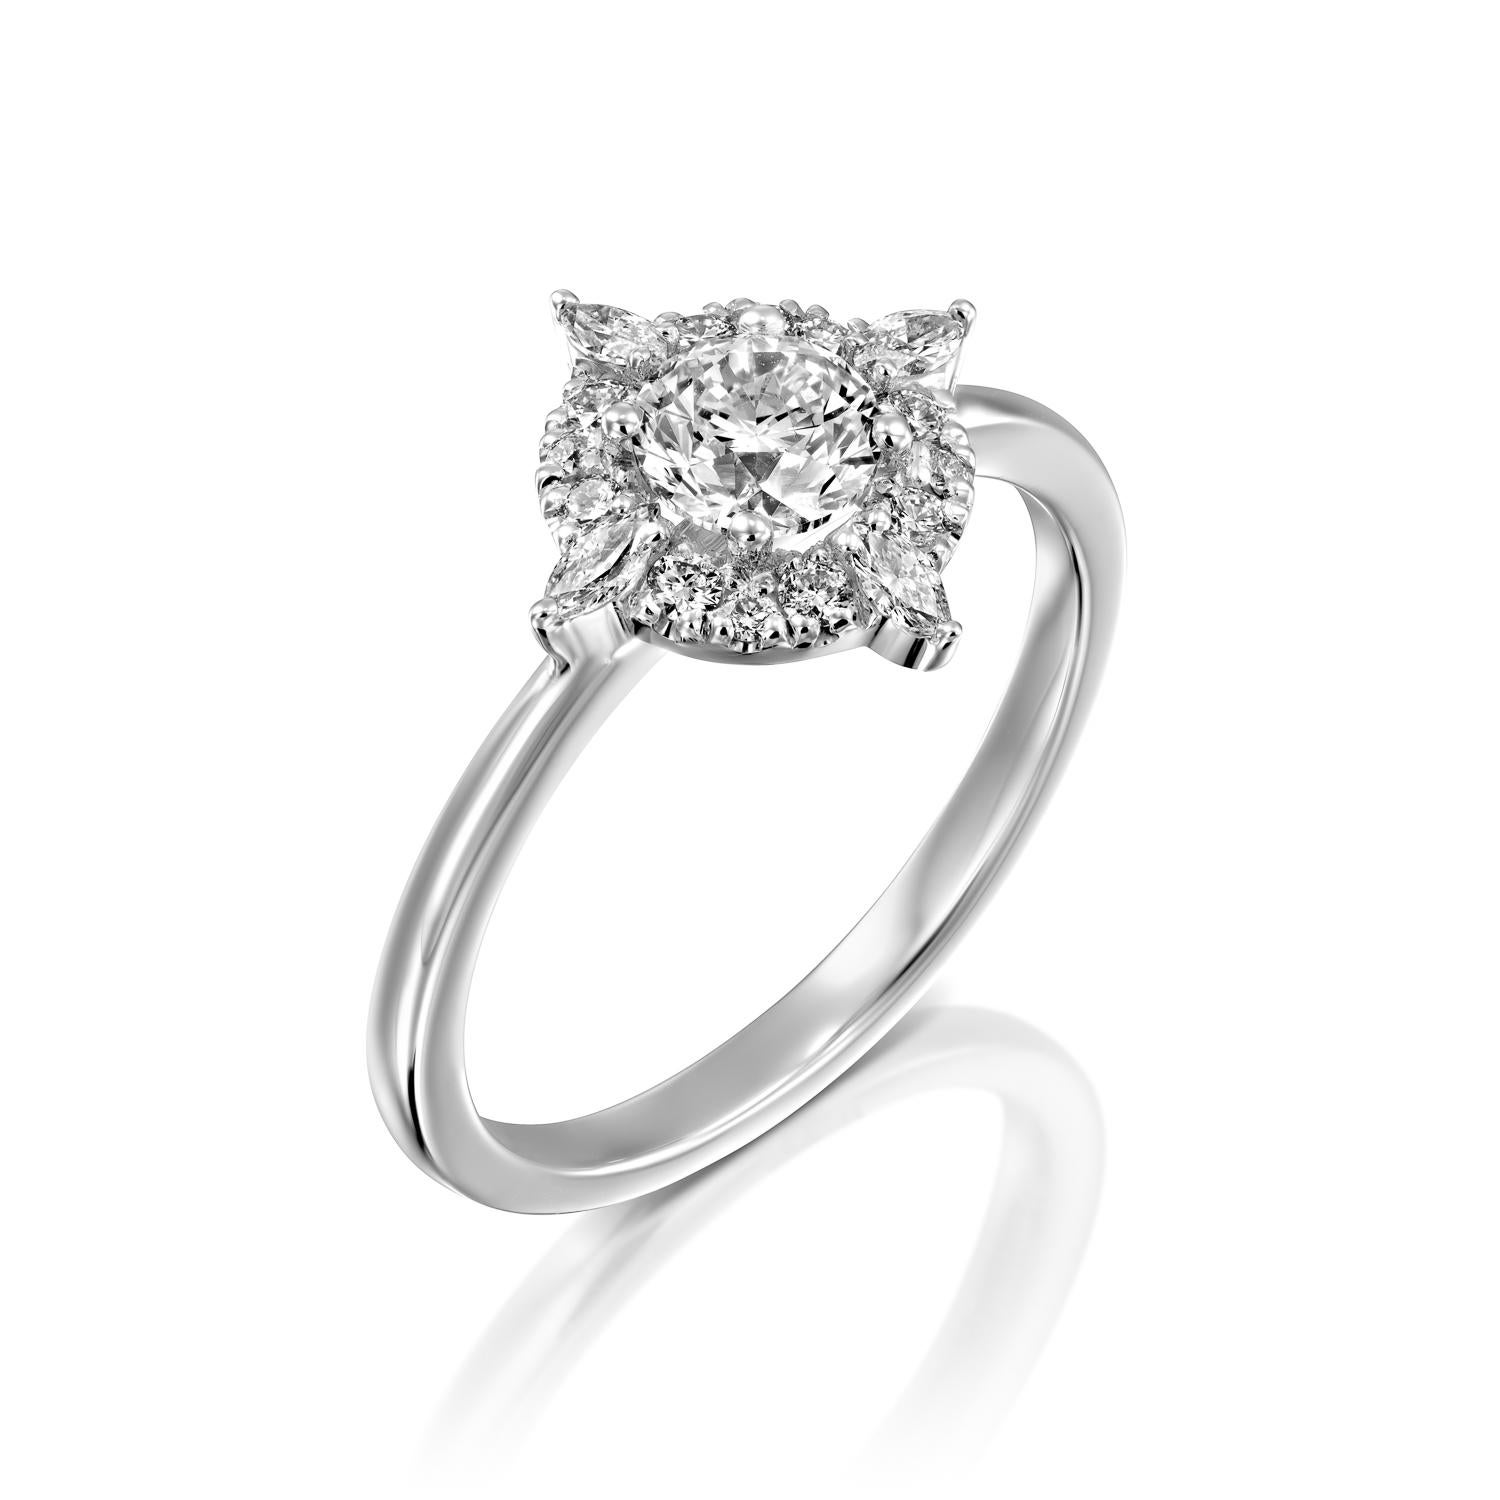 Unique and special Victorian style GIA certified diamond engagement ring. Ring features a 3/4 carat round cut 100% eye clean natural diamond of F-G color and VS2-SI1 clarity and it is surrounded by smaller natural round diamonds approx. 0.25 total